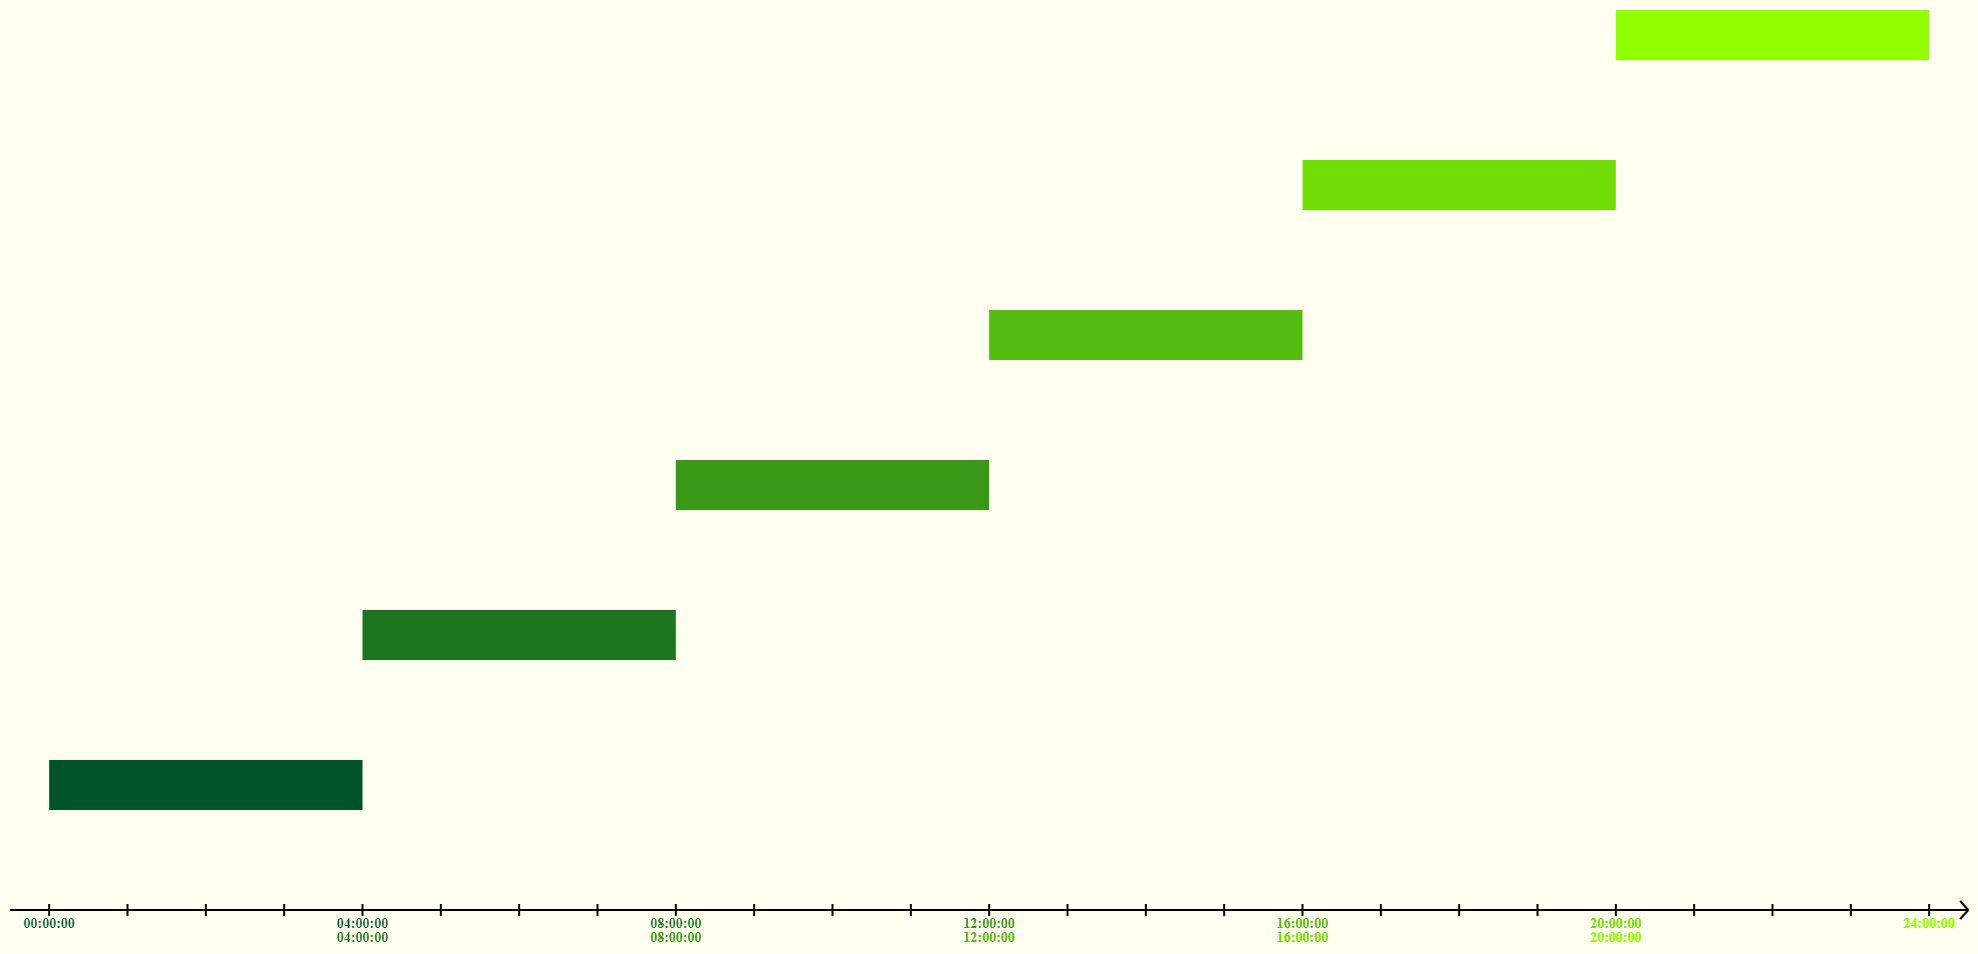 This example splits a 24-hour day into six equal time slots and draws them on an image. Each time interval lasts 4 hours and each next interval immediately jumps a step above the previous one, forming a continuous staircase. To make sure that there is no unused time between the intervals, we print the start and end time of each interval on the timeline. As these values match, we can be sure that the intervals are continuous. We use the "ivory" color for the background, set the interval thickness to 50px, and color them in shades of green (specified using hex codes).